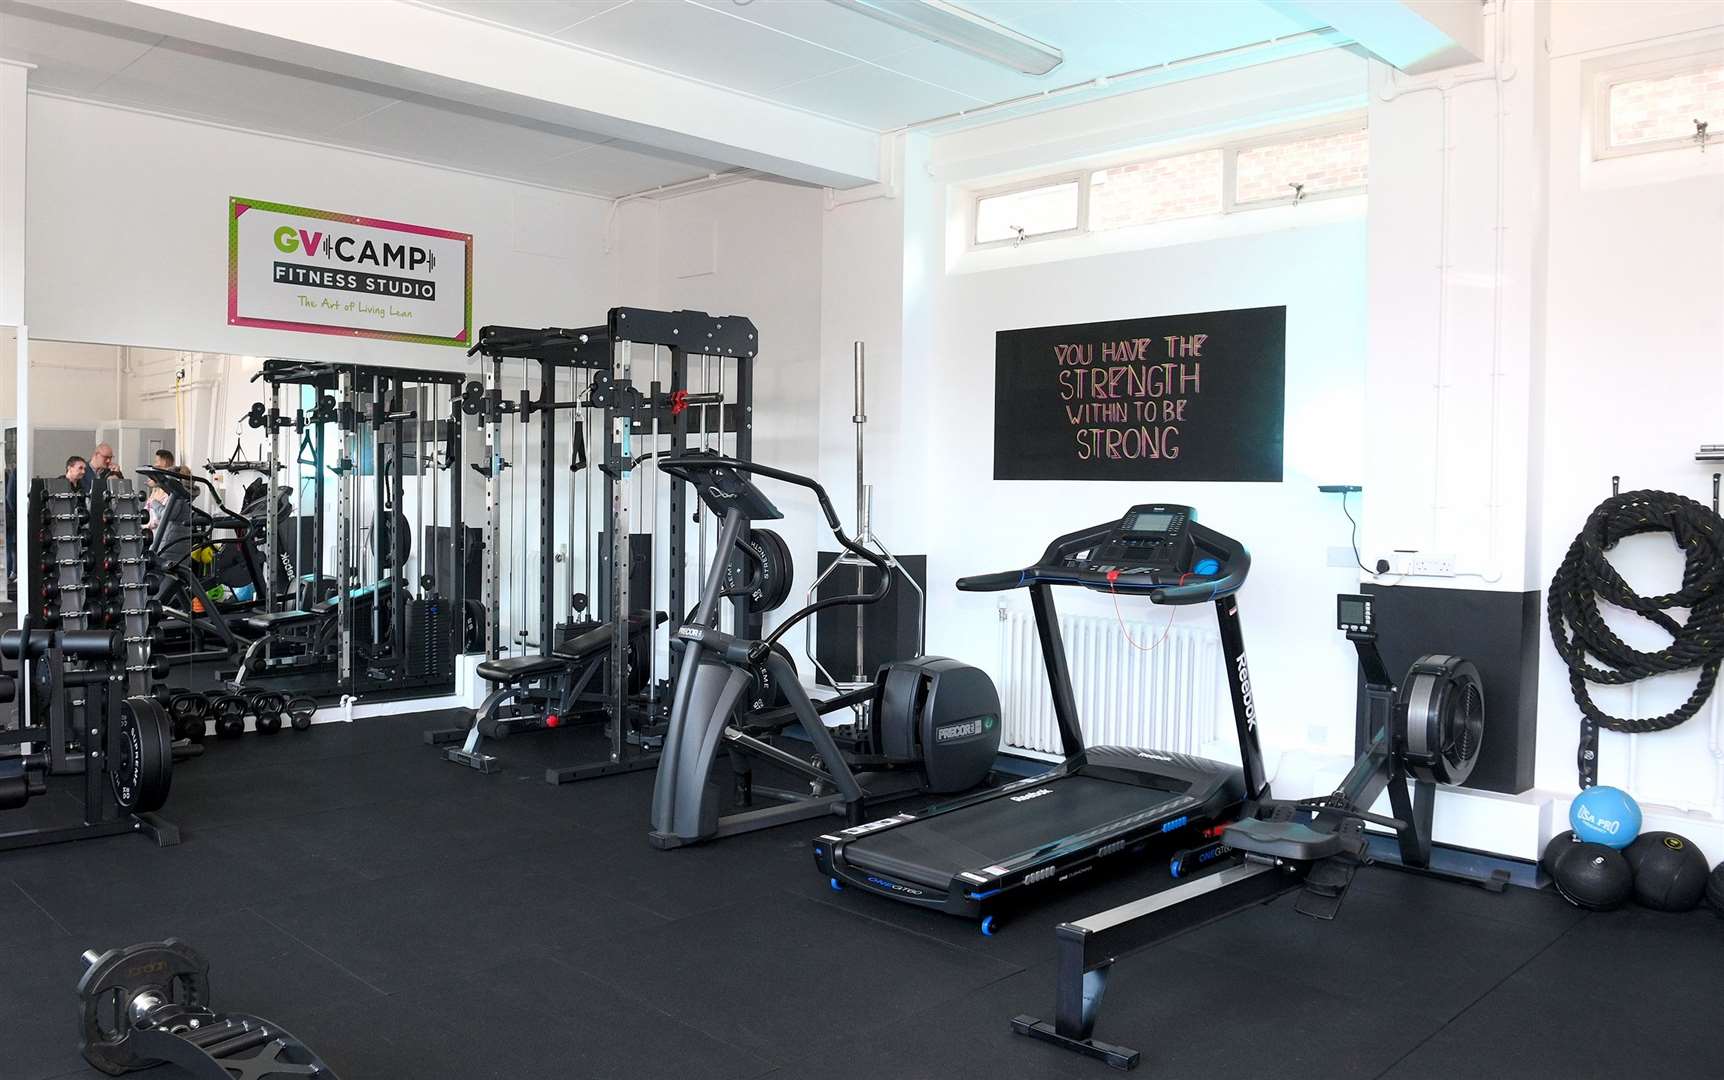 The studio is fully kitted out for appointment only one-to-one sessions, groups sessions and classes. Picture: Mecha Morton